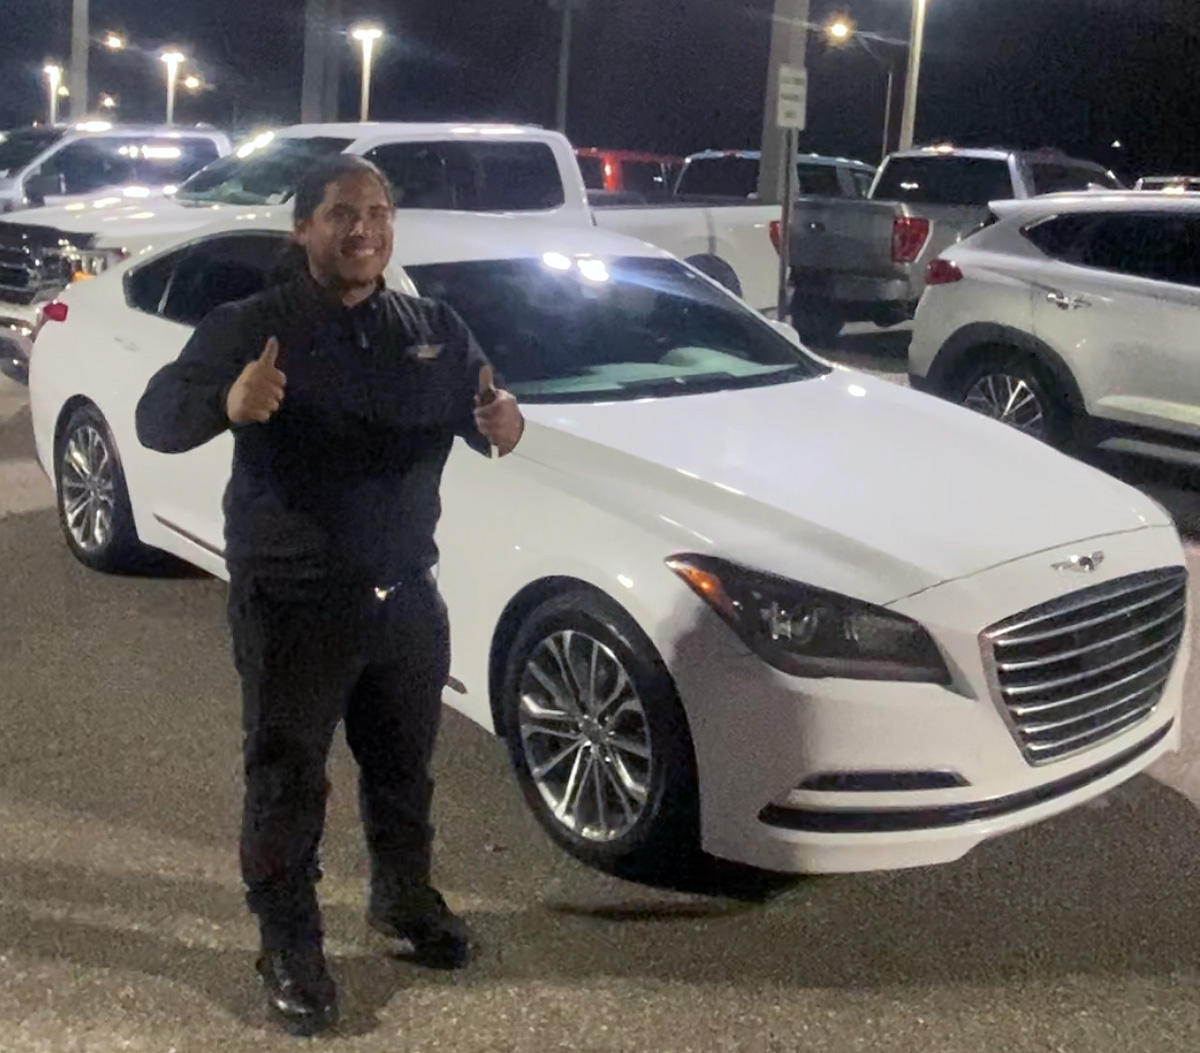 When you're buying a #LuxurySedan like the #GenesisG80, you expect #ExceptionalService and a #PositiveExpereince, that's why Dejuan Brown chose #LakelandAutomall for #TheBest selection, service and guest experience. #Congratulations Dejuan & #ThankYou - we're here for you! #G80